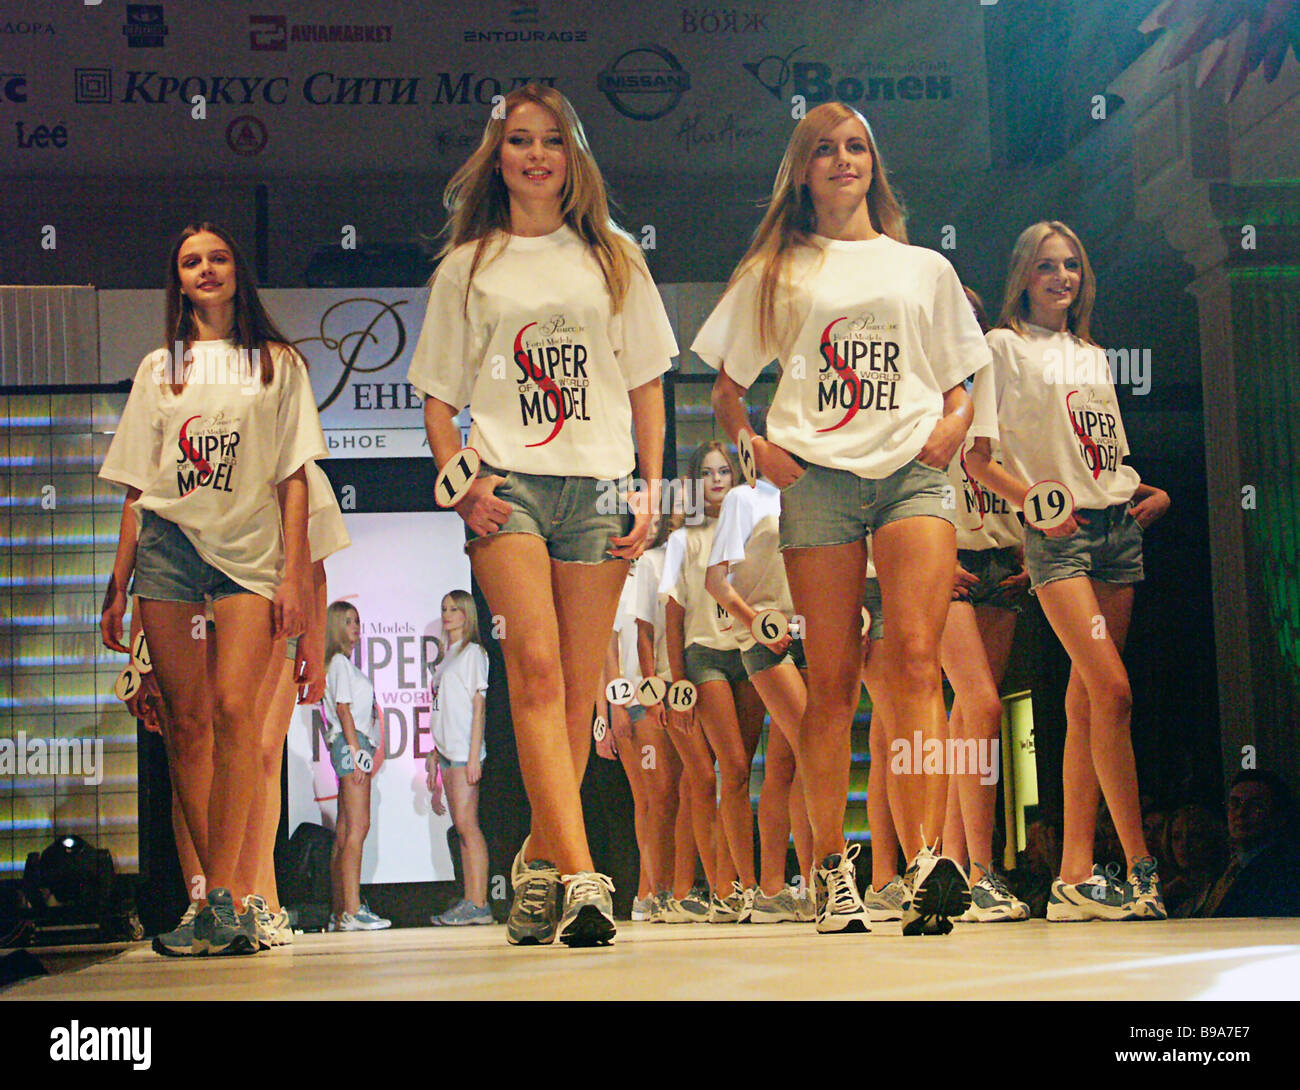 The 20 World Supermodel contest finalists represent 13 Russian cities and vary in age from 14 to 22 Stock Photo